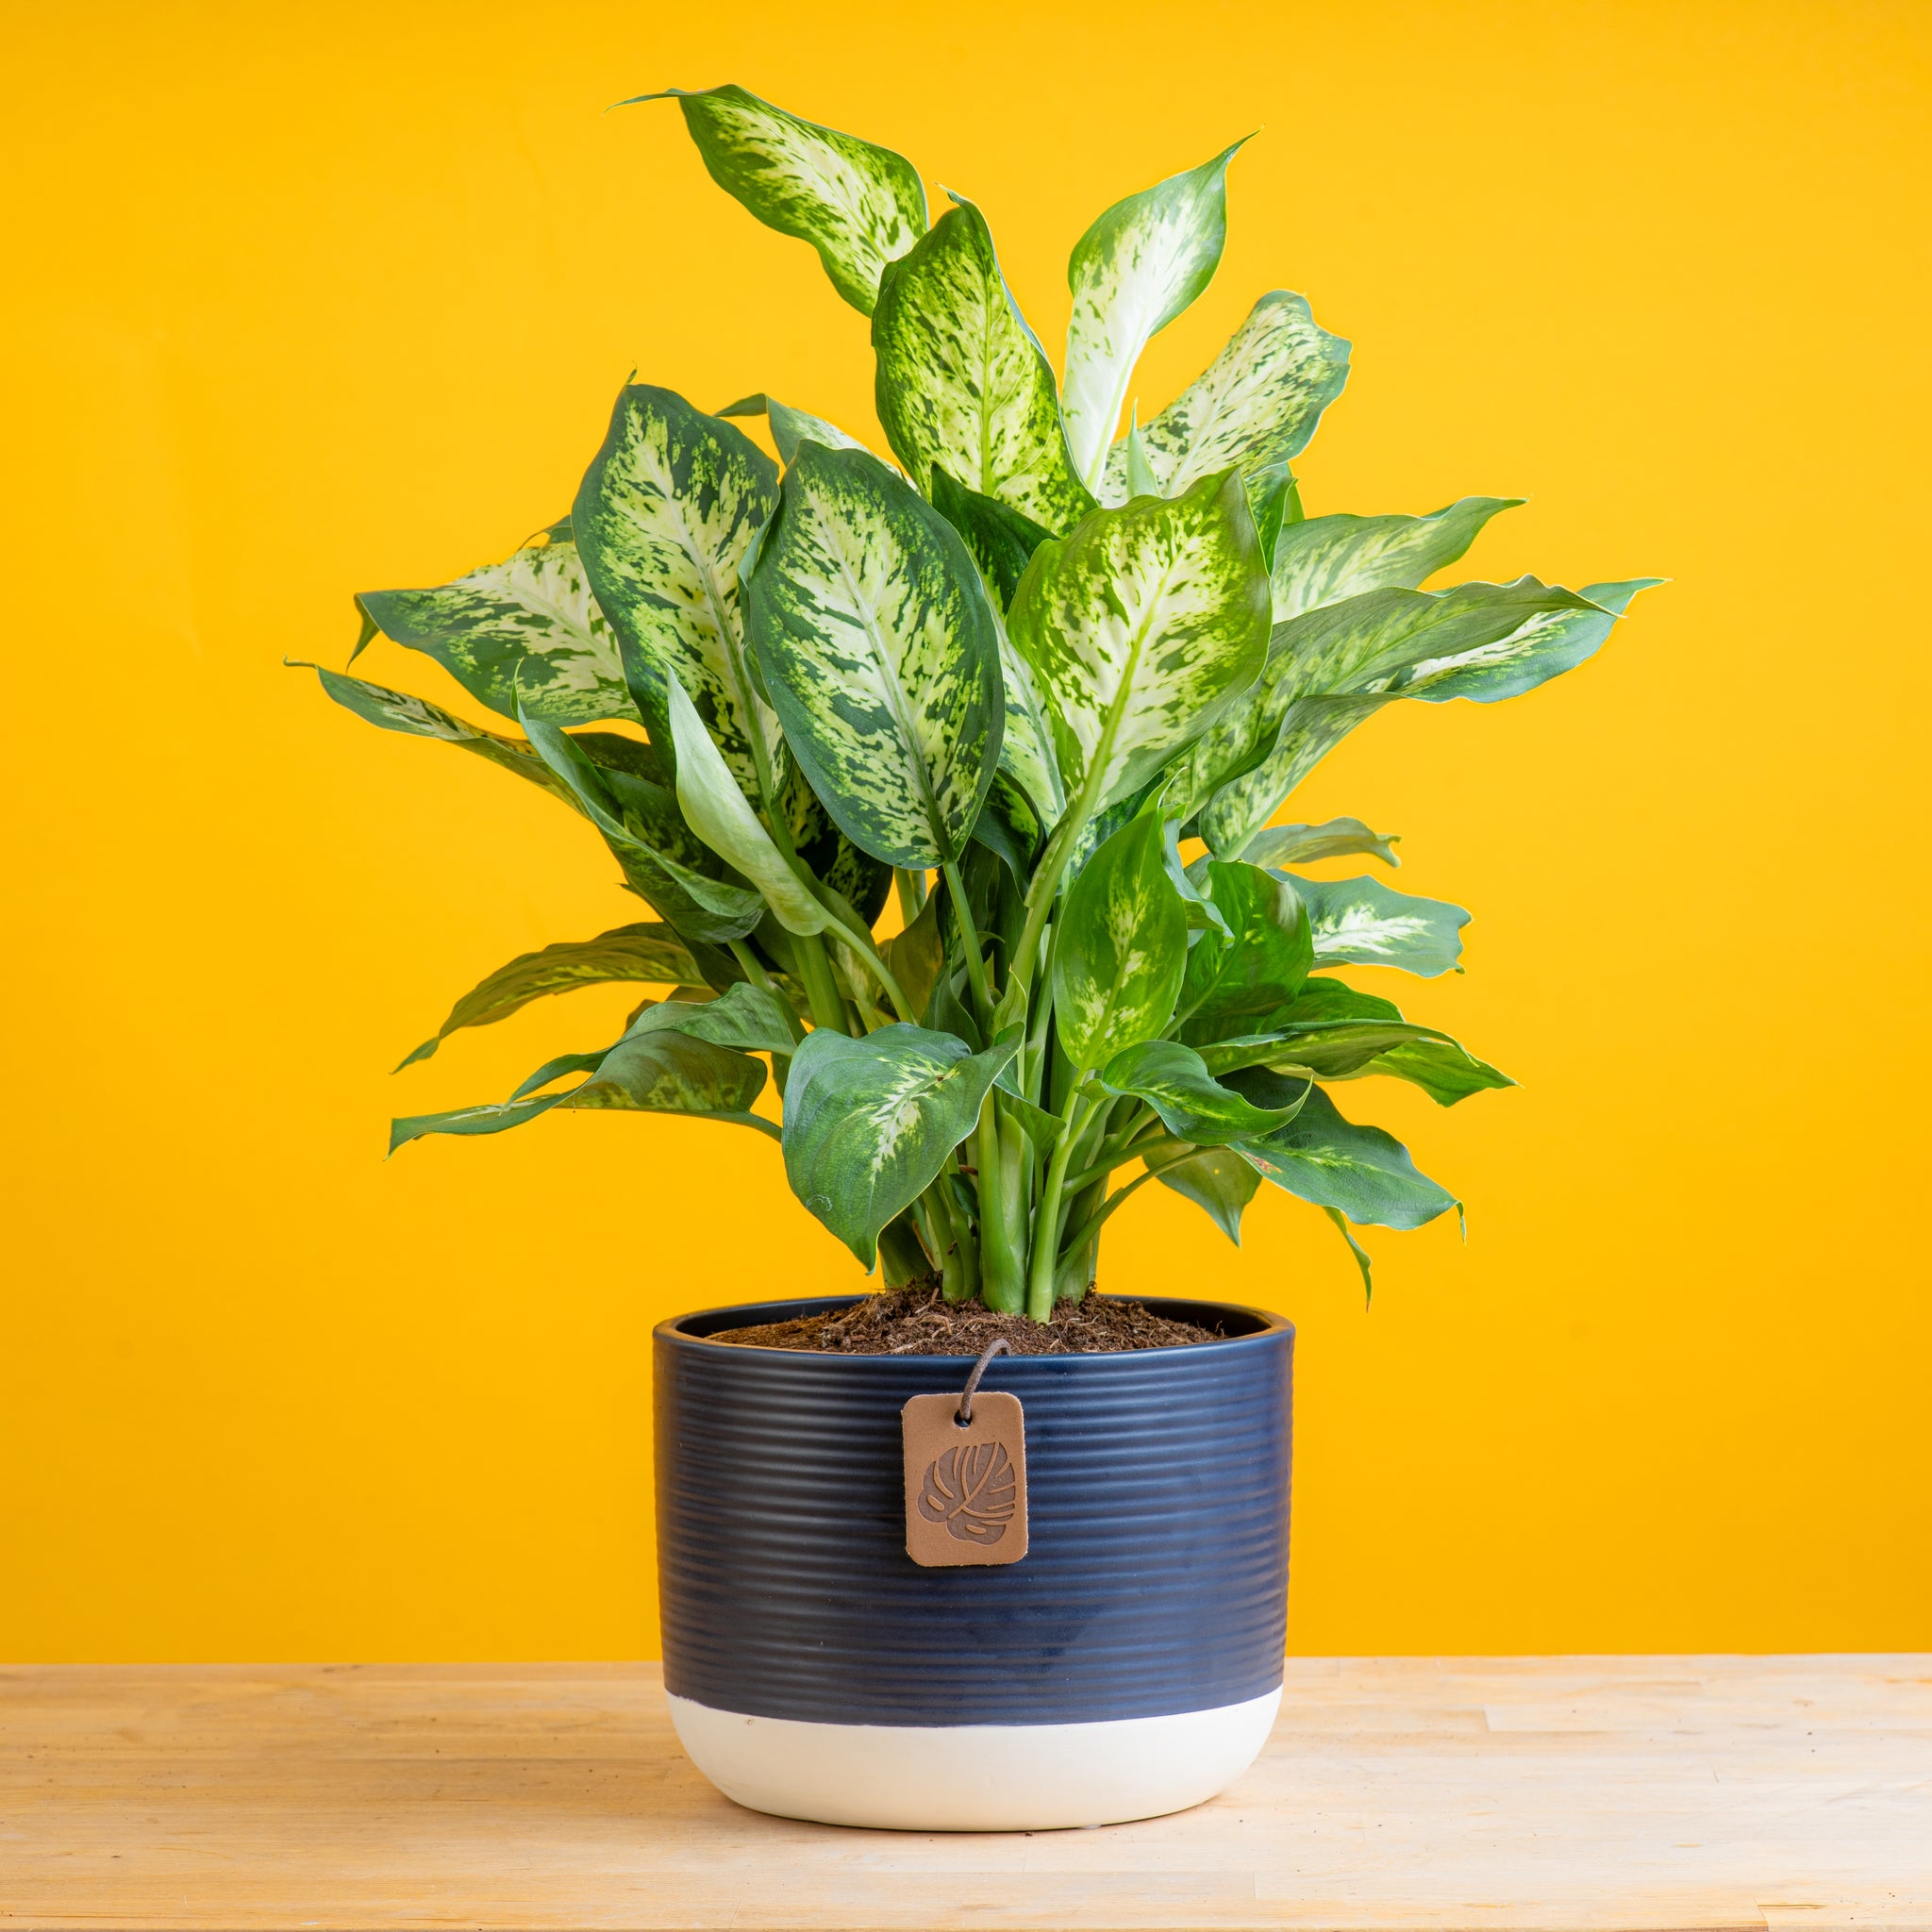 dieffenbachia plant in navy and white two tone ceramic pot set against a bright yellow background